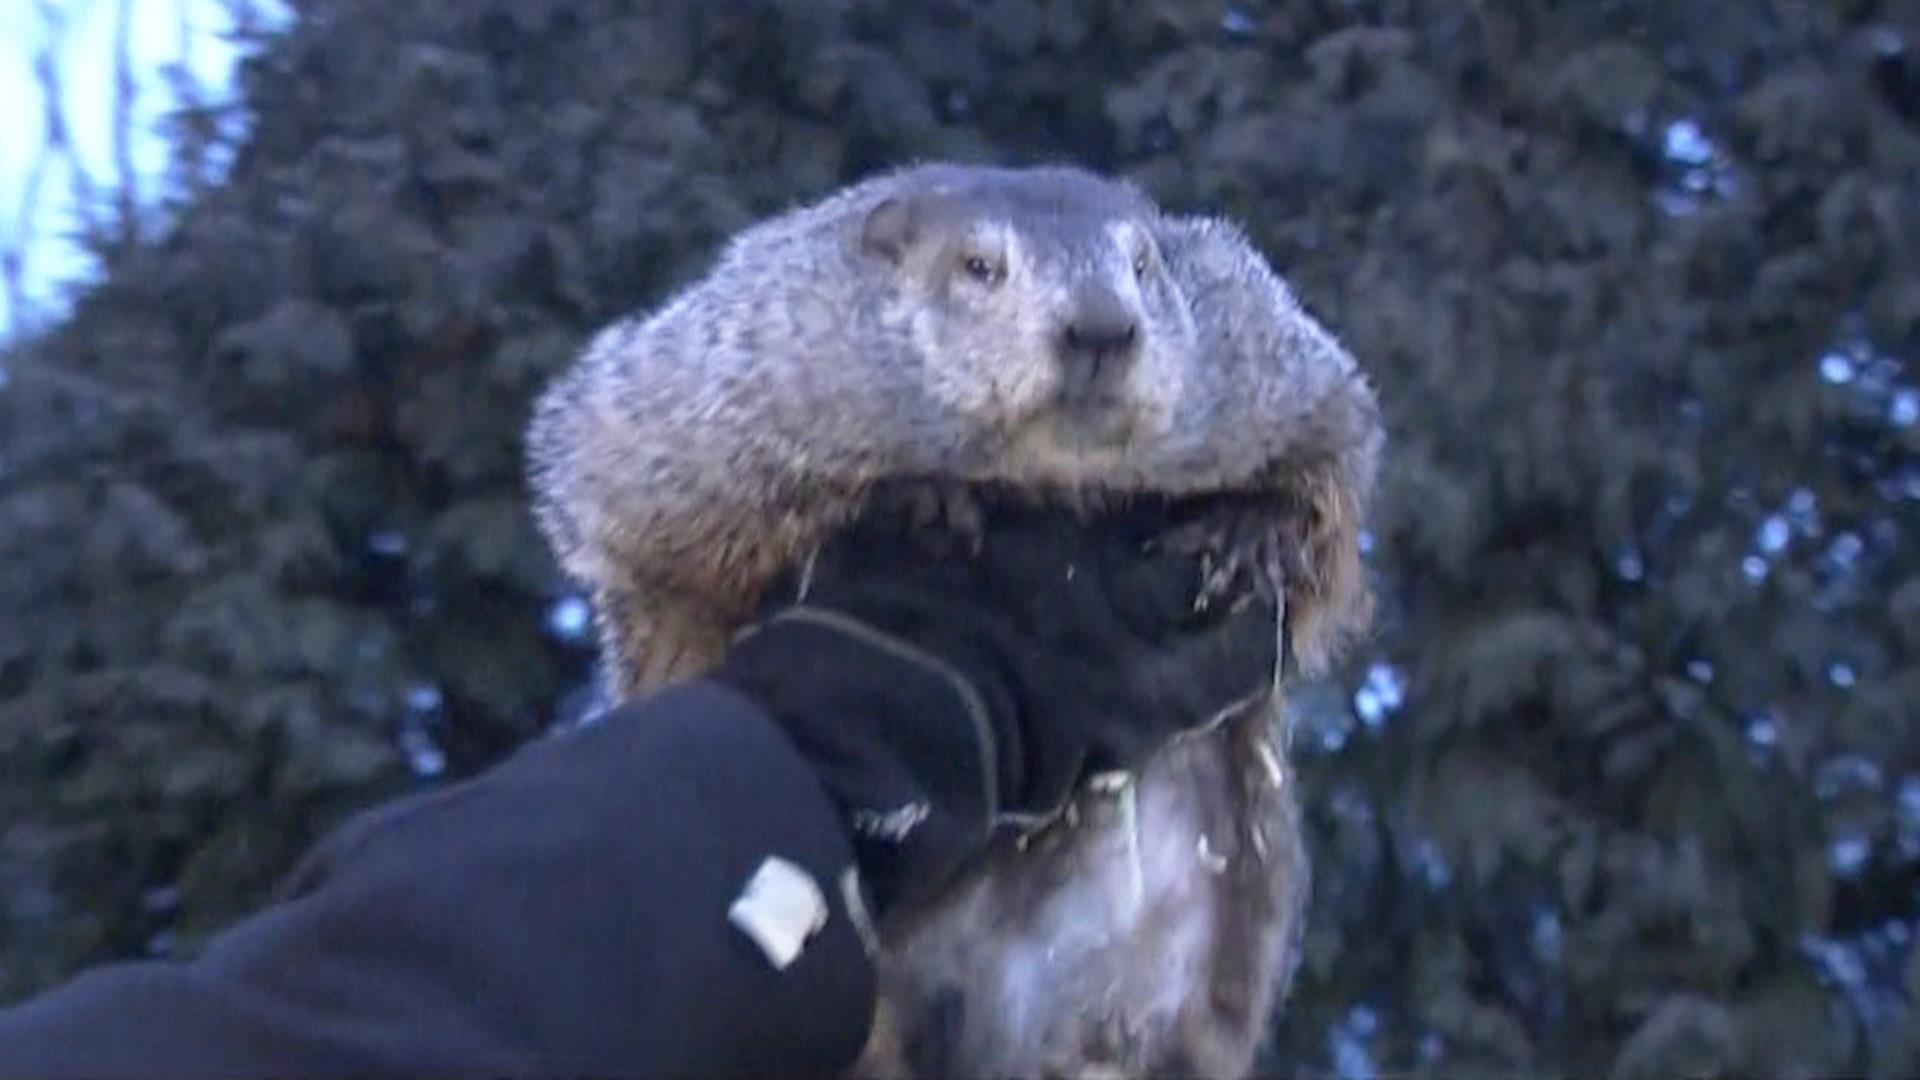 1920x1080 Groundhog Day: Punxsutawney Phil predicts 6 more weeks of winter - TODAY.com